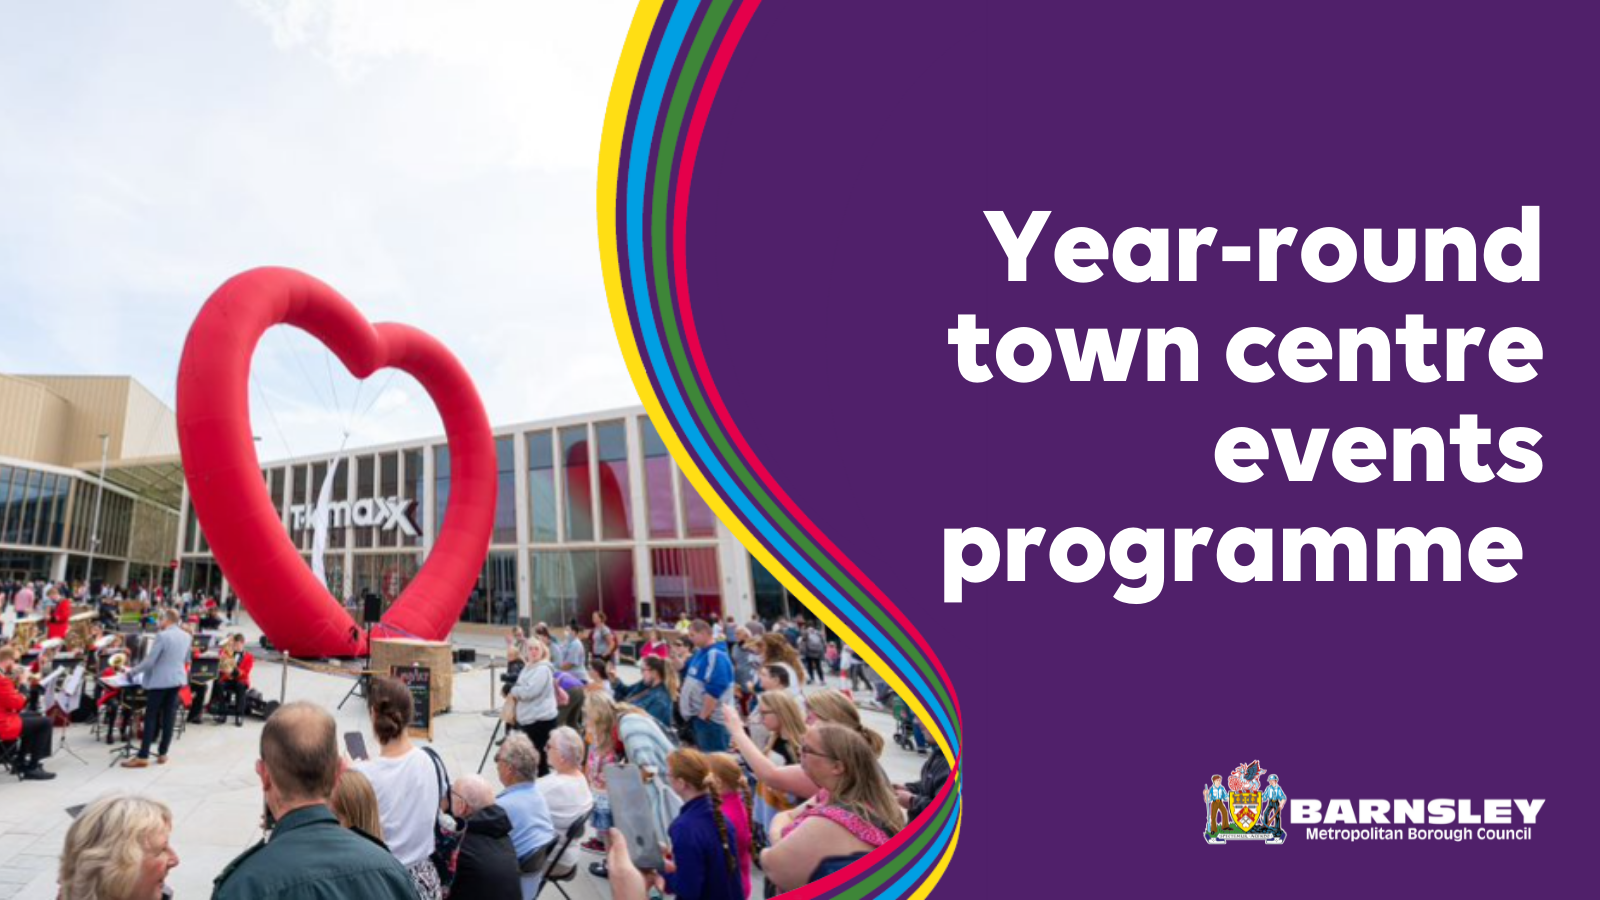 Year-round town centre events programme